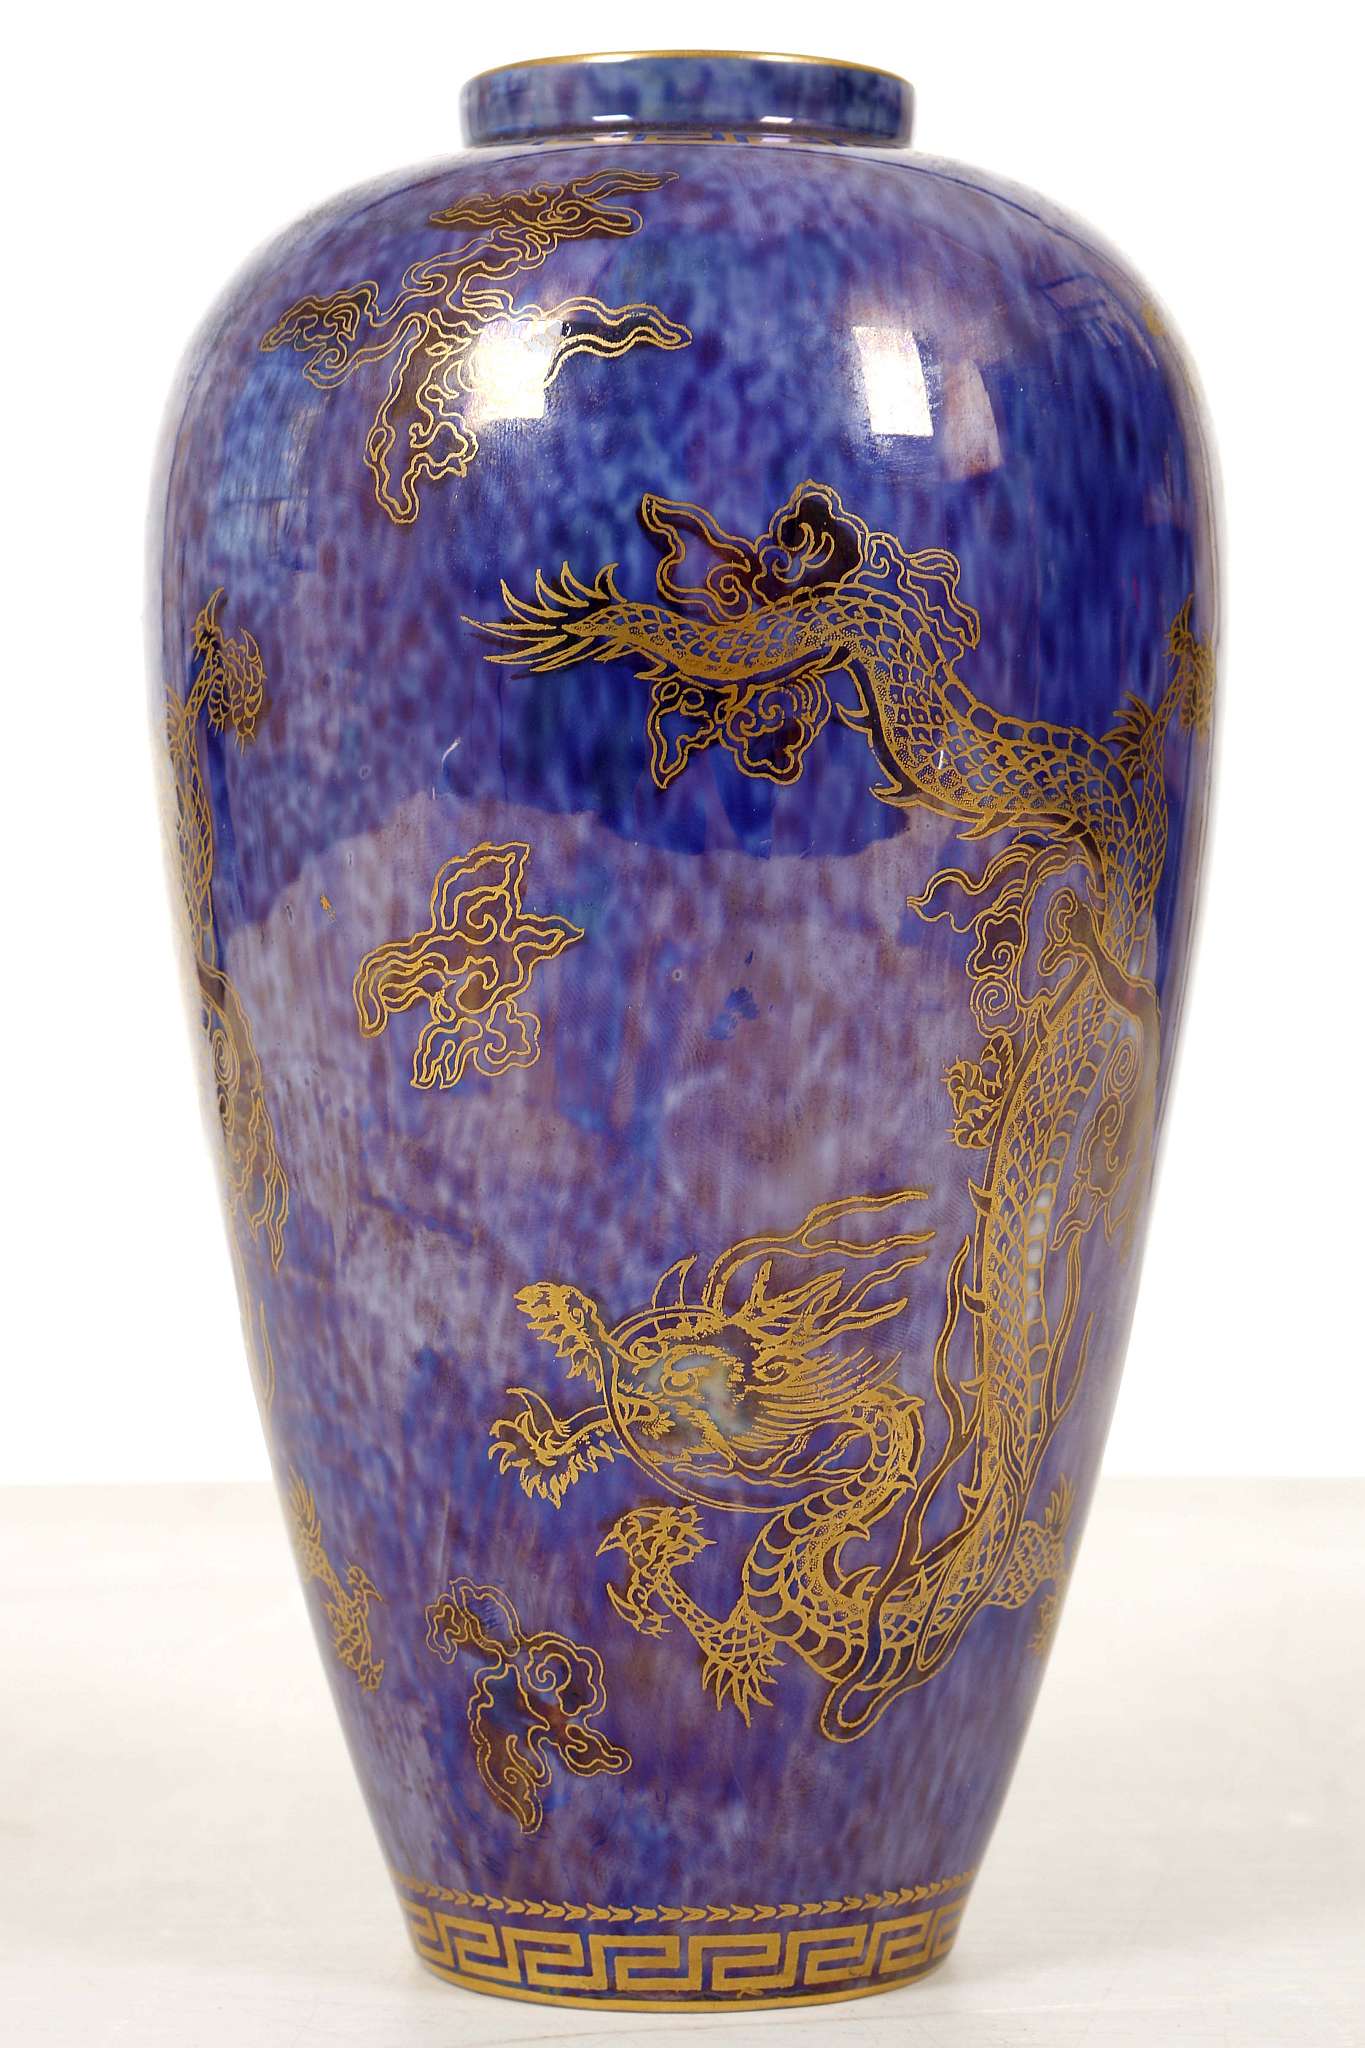 A WEDGWOOD DRAGON LUSTRE VASE, circa 1920, designed by Daisy Makeig-Jones, the baluster form